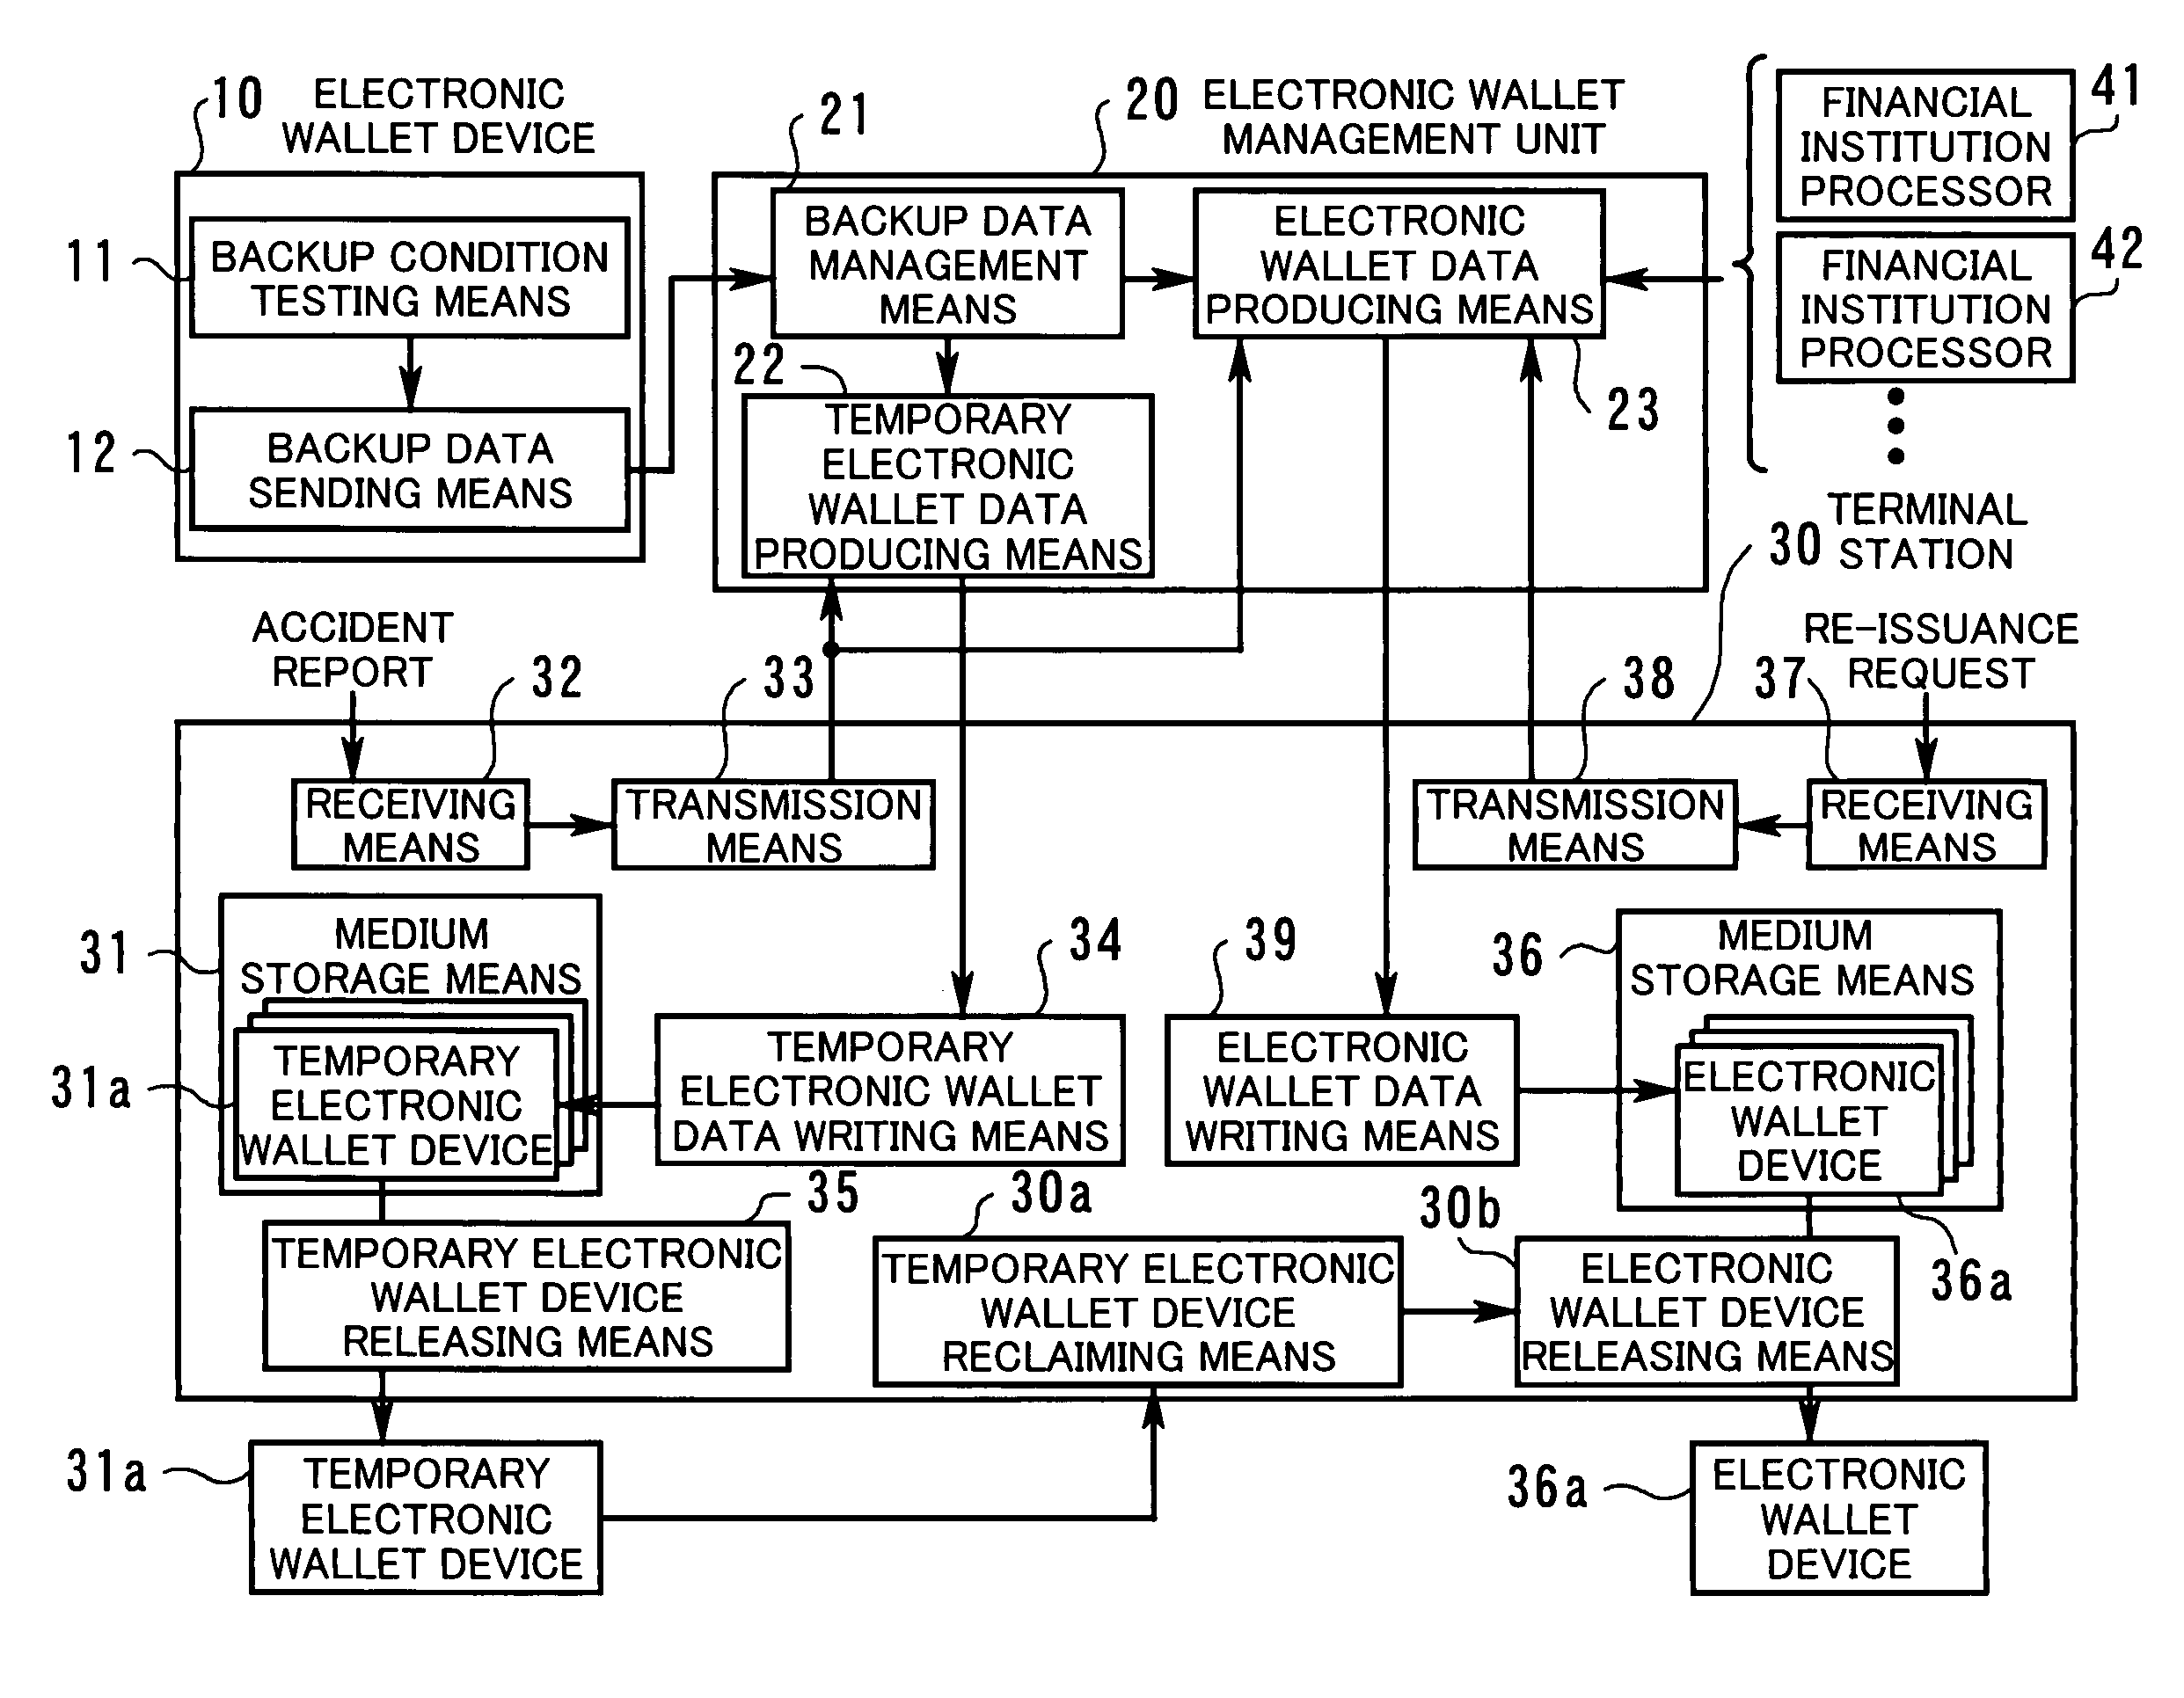 Electronic wallet management system, electronic wallet device, electronic wallet management unit, and terminal station